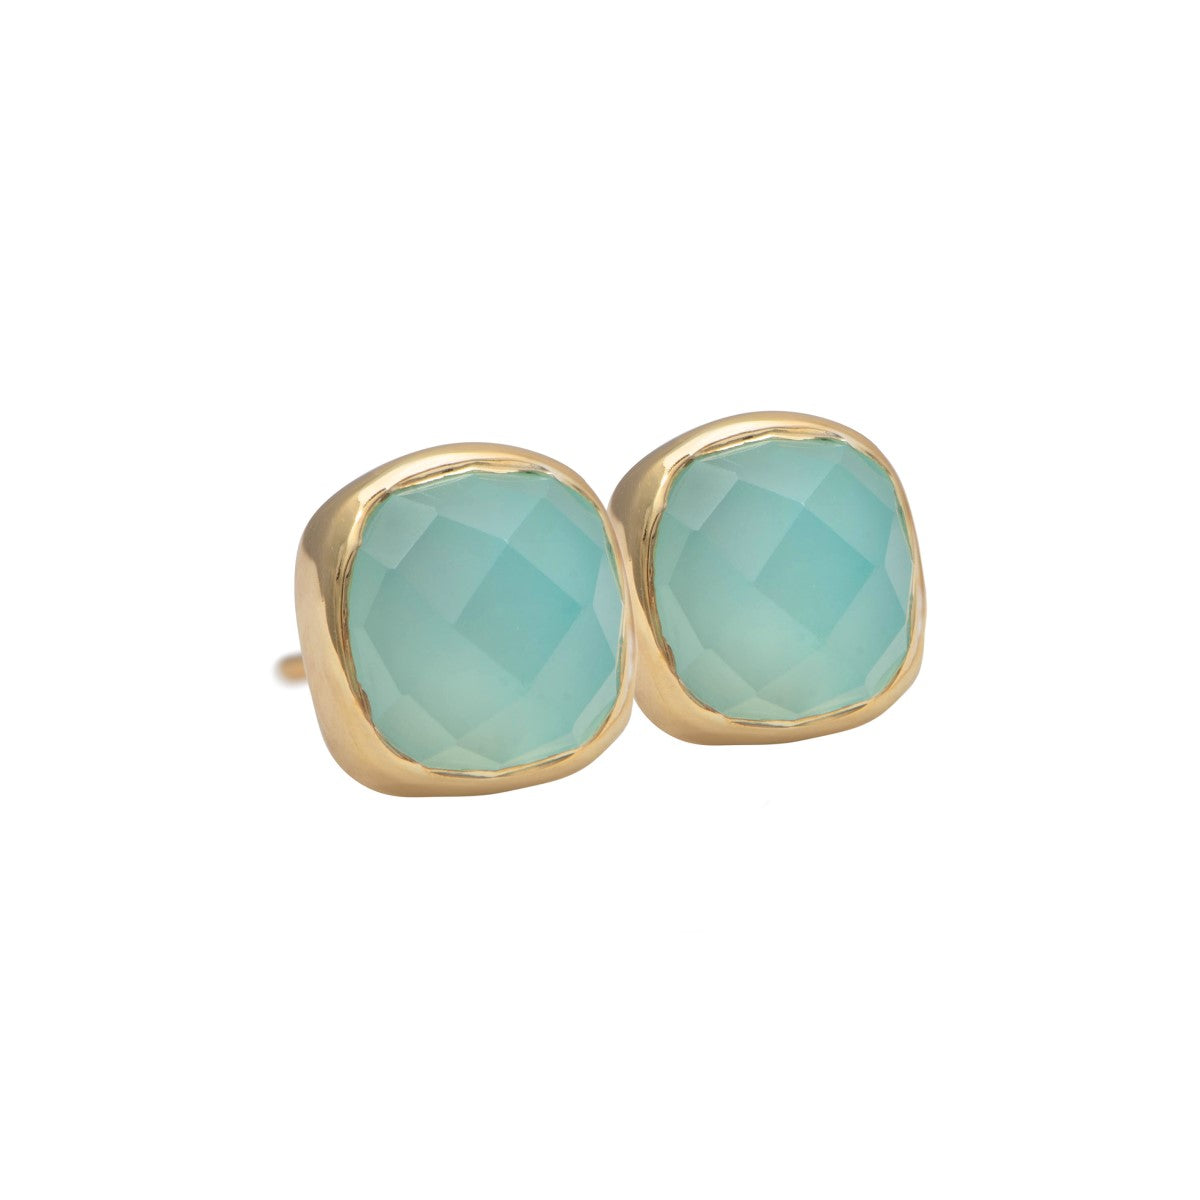 Faceted Square Aqua Chalcedony Gemstone Stud Earrings in Gold Plated Sterling Silver